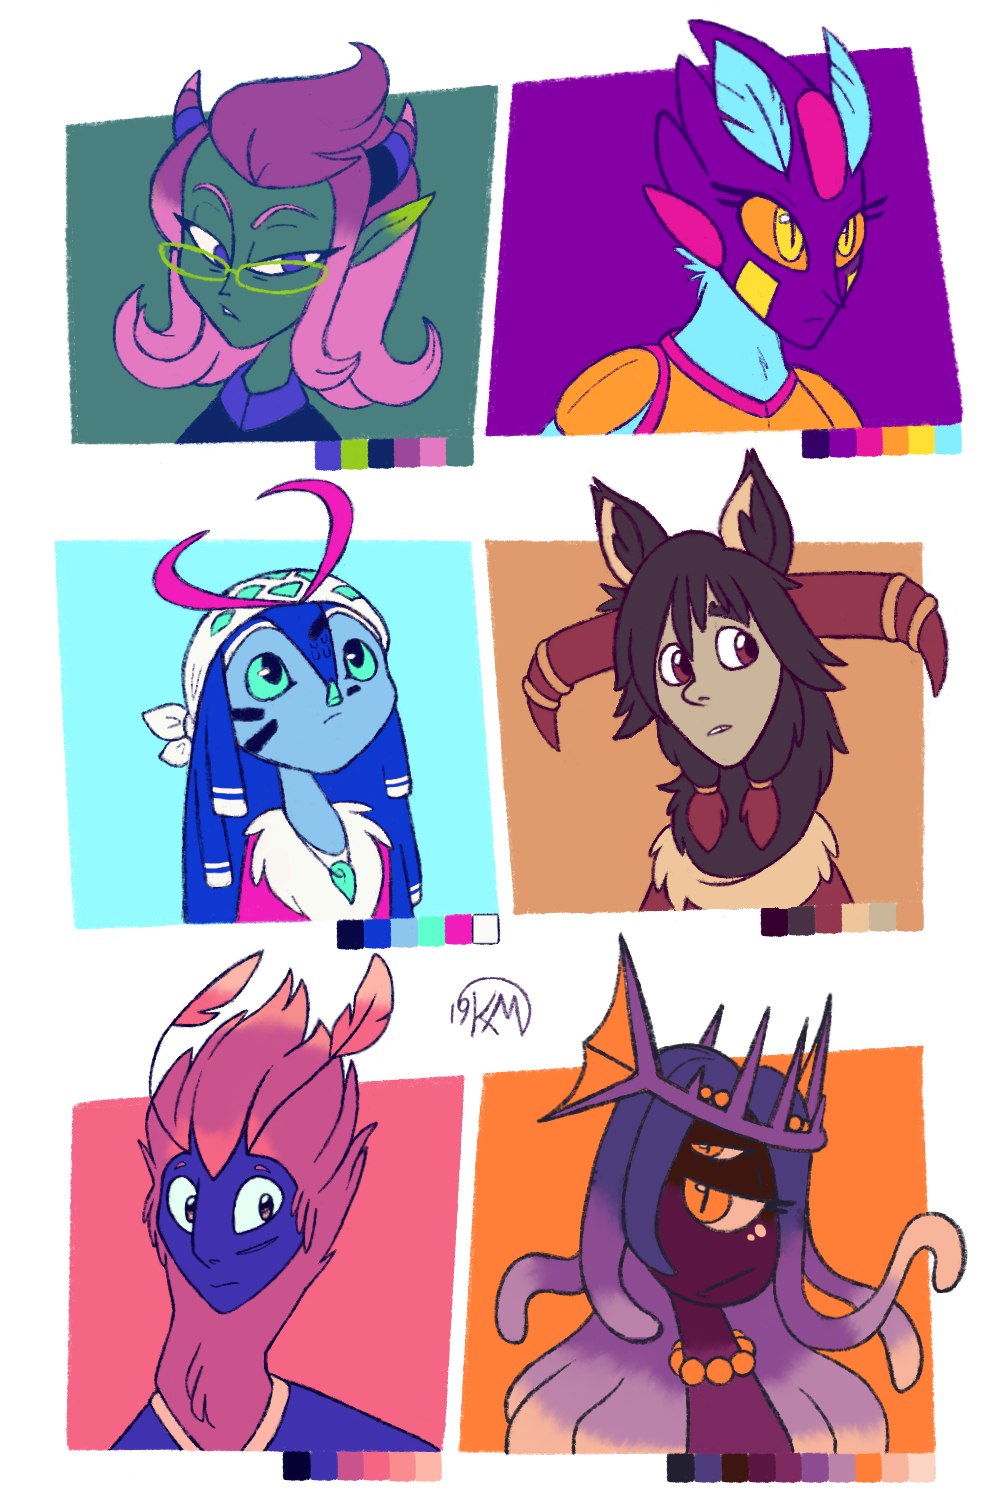 Character Doodles - Swapped Palettes